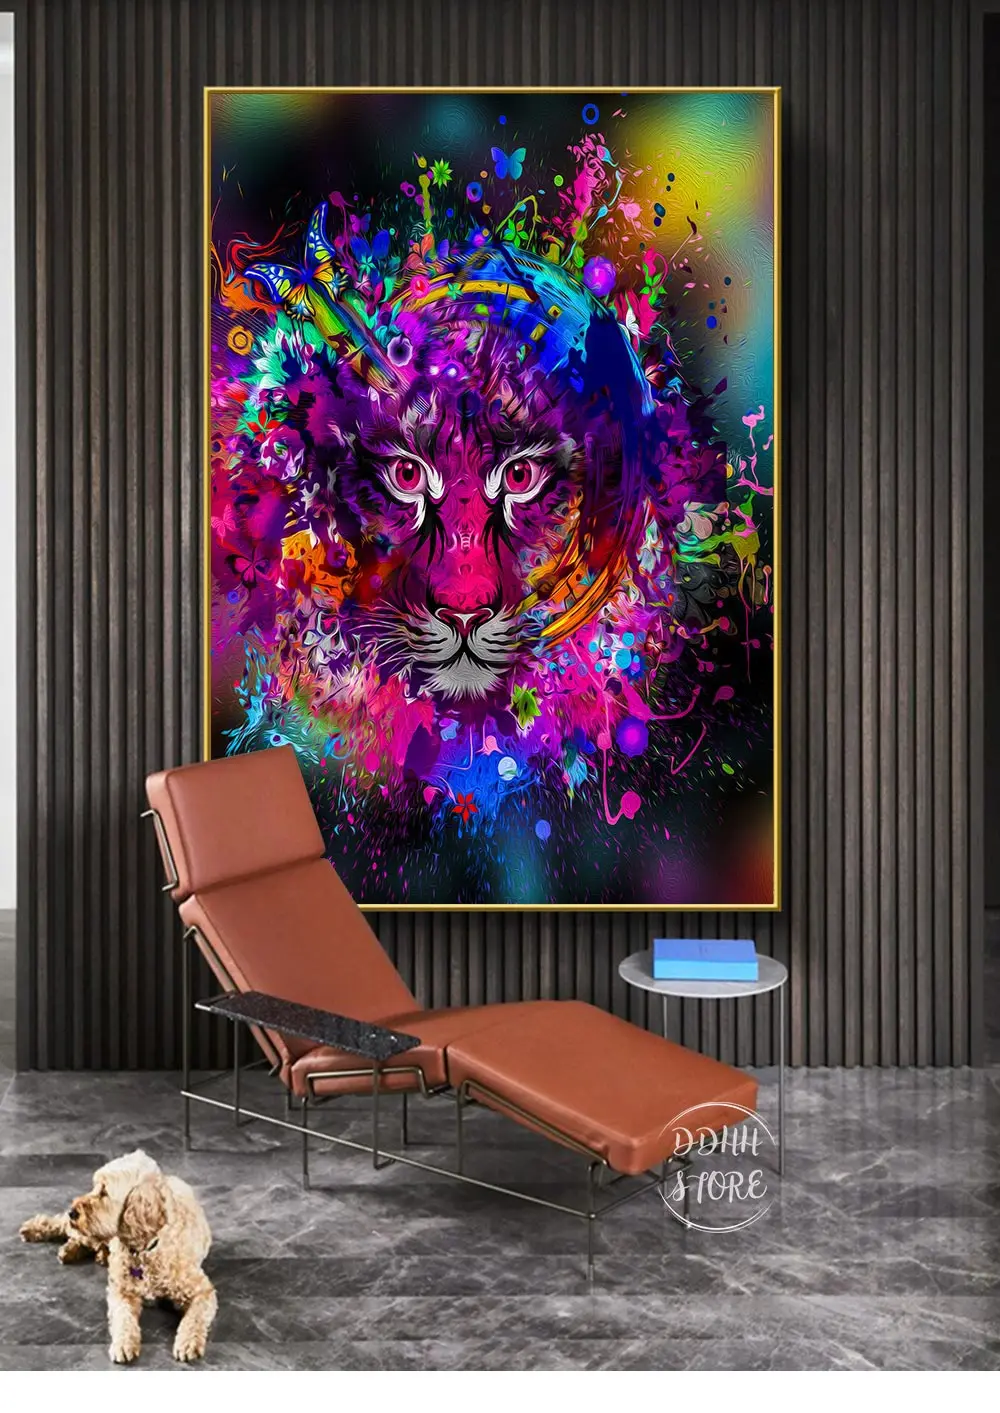 Colorful Lion Abstract Anthropomorphic Animal Canvas Painting Wall Art Posters Prints Cuadros Decor Pictures For Home Design